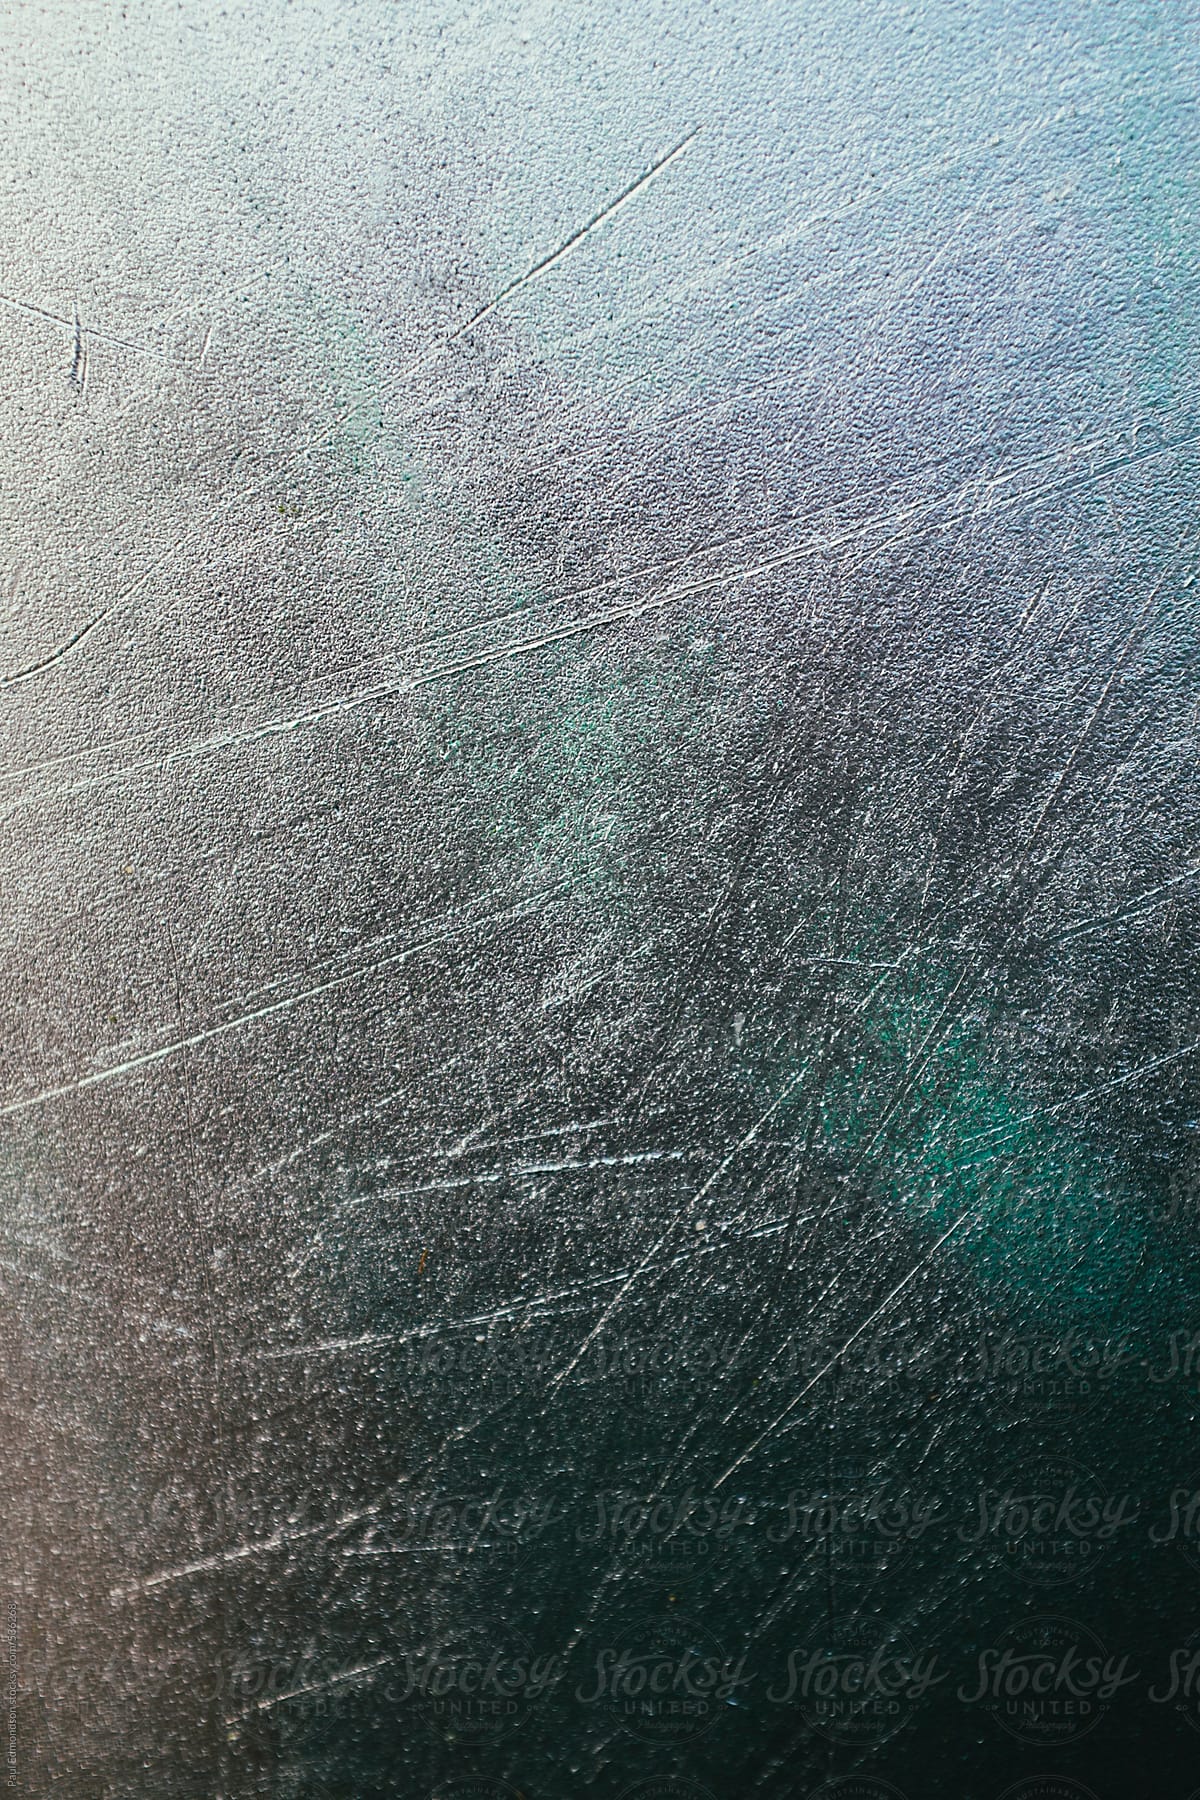 Metallic silver paint in scratched plastic surface, close up